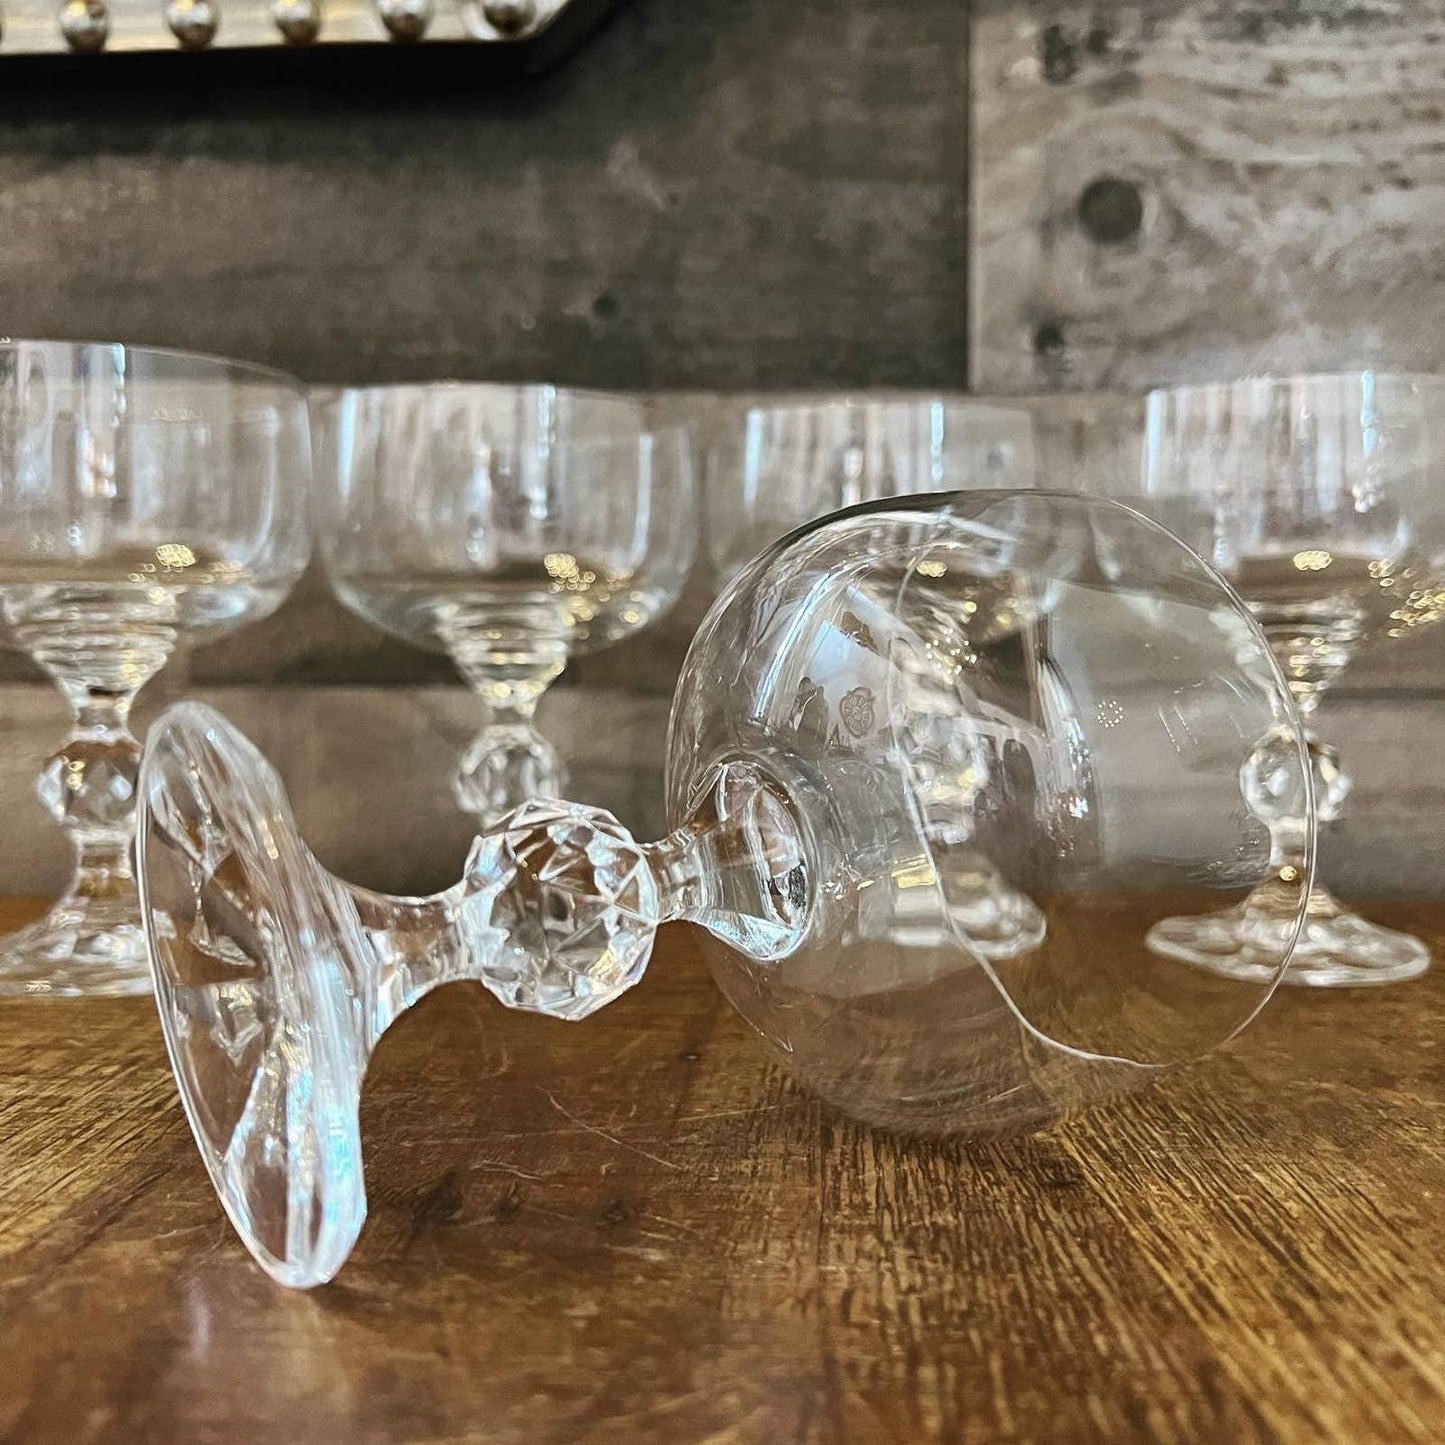 Set of 8 Bohemia crystal coupes - cocktail glasses